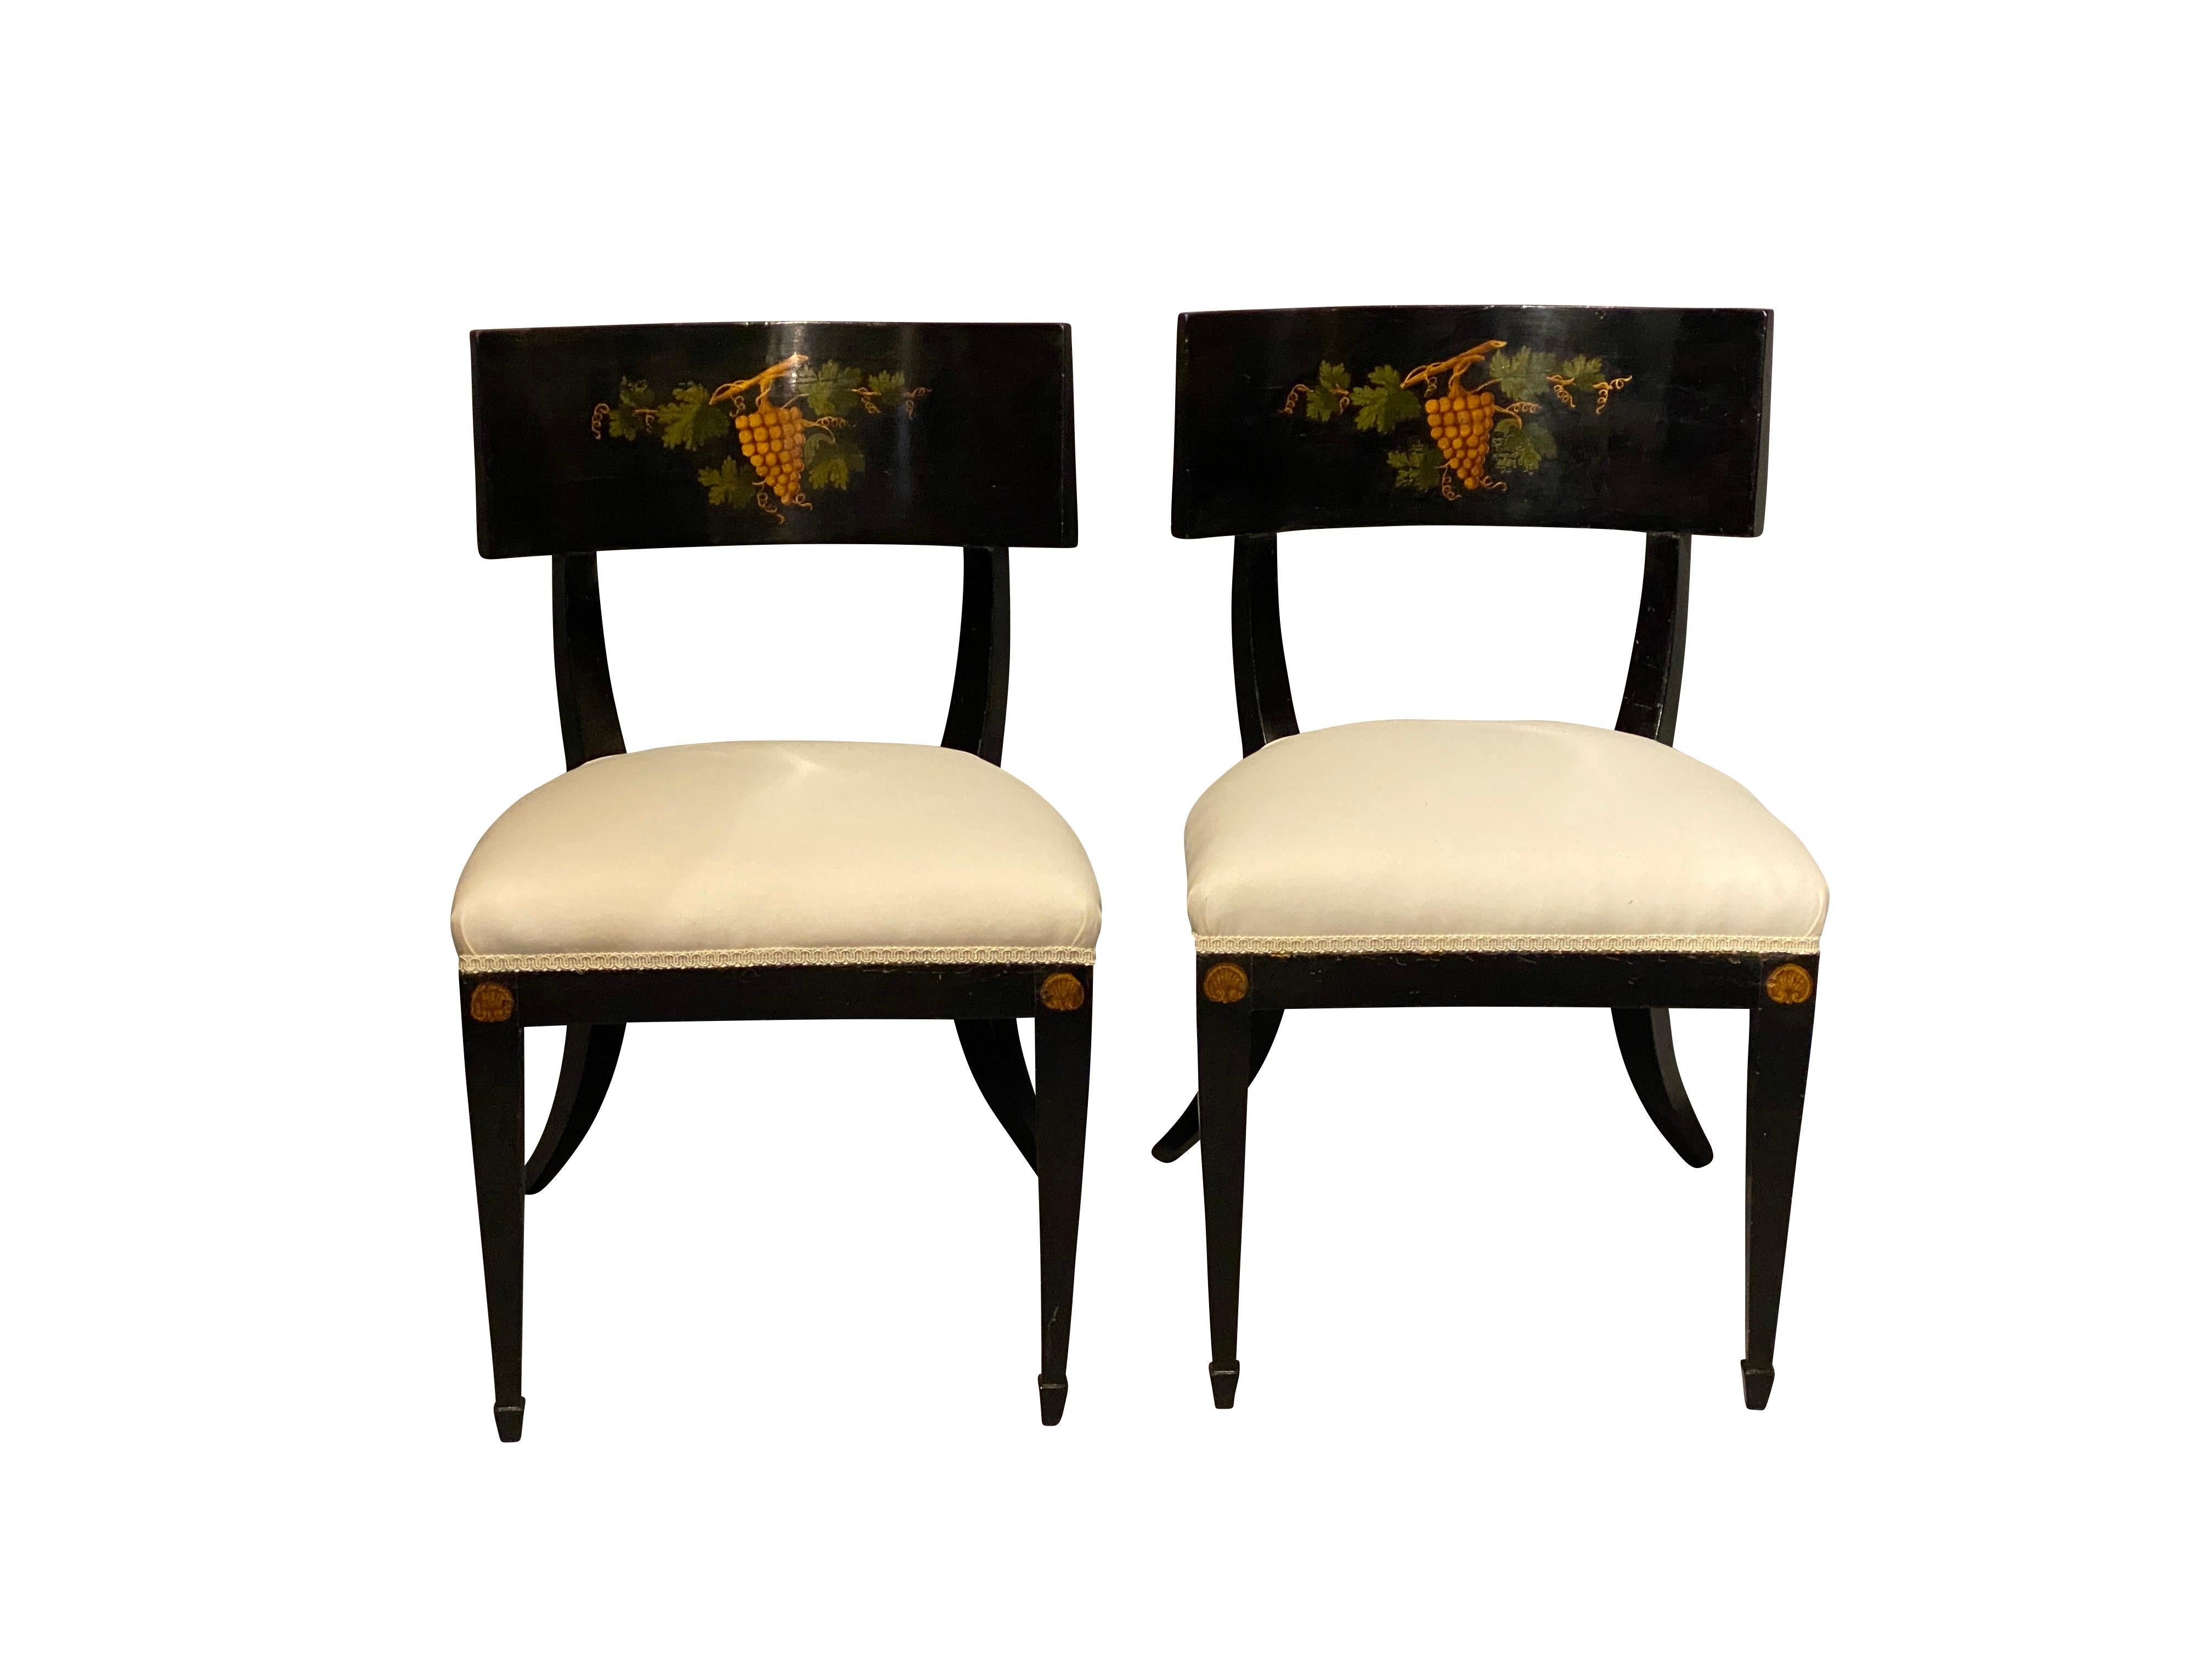 Each with a curved wide seat rail with grape leaves and grapes central decoration, upholstered seat, raised on exaggerated saber legs. Provenance; Estate of William Hodgins, Interior designer. Boston.